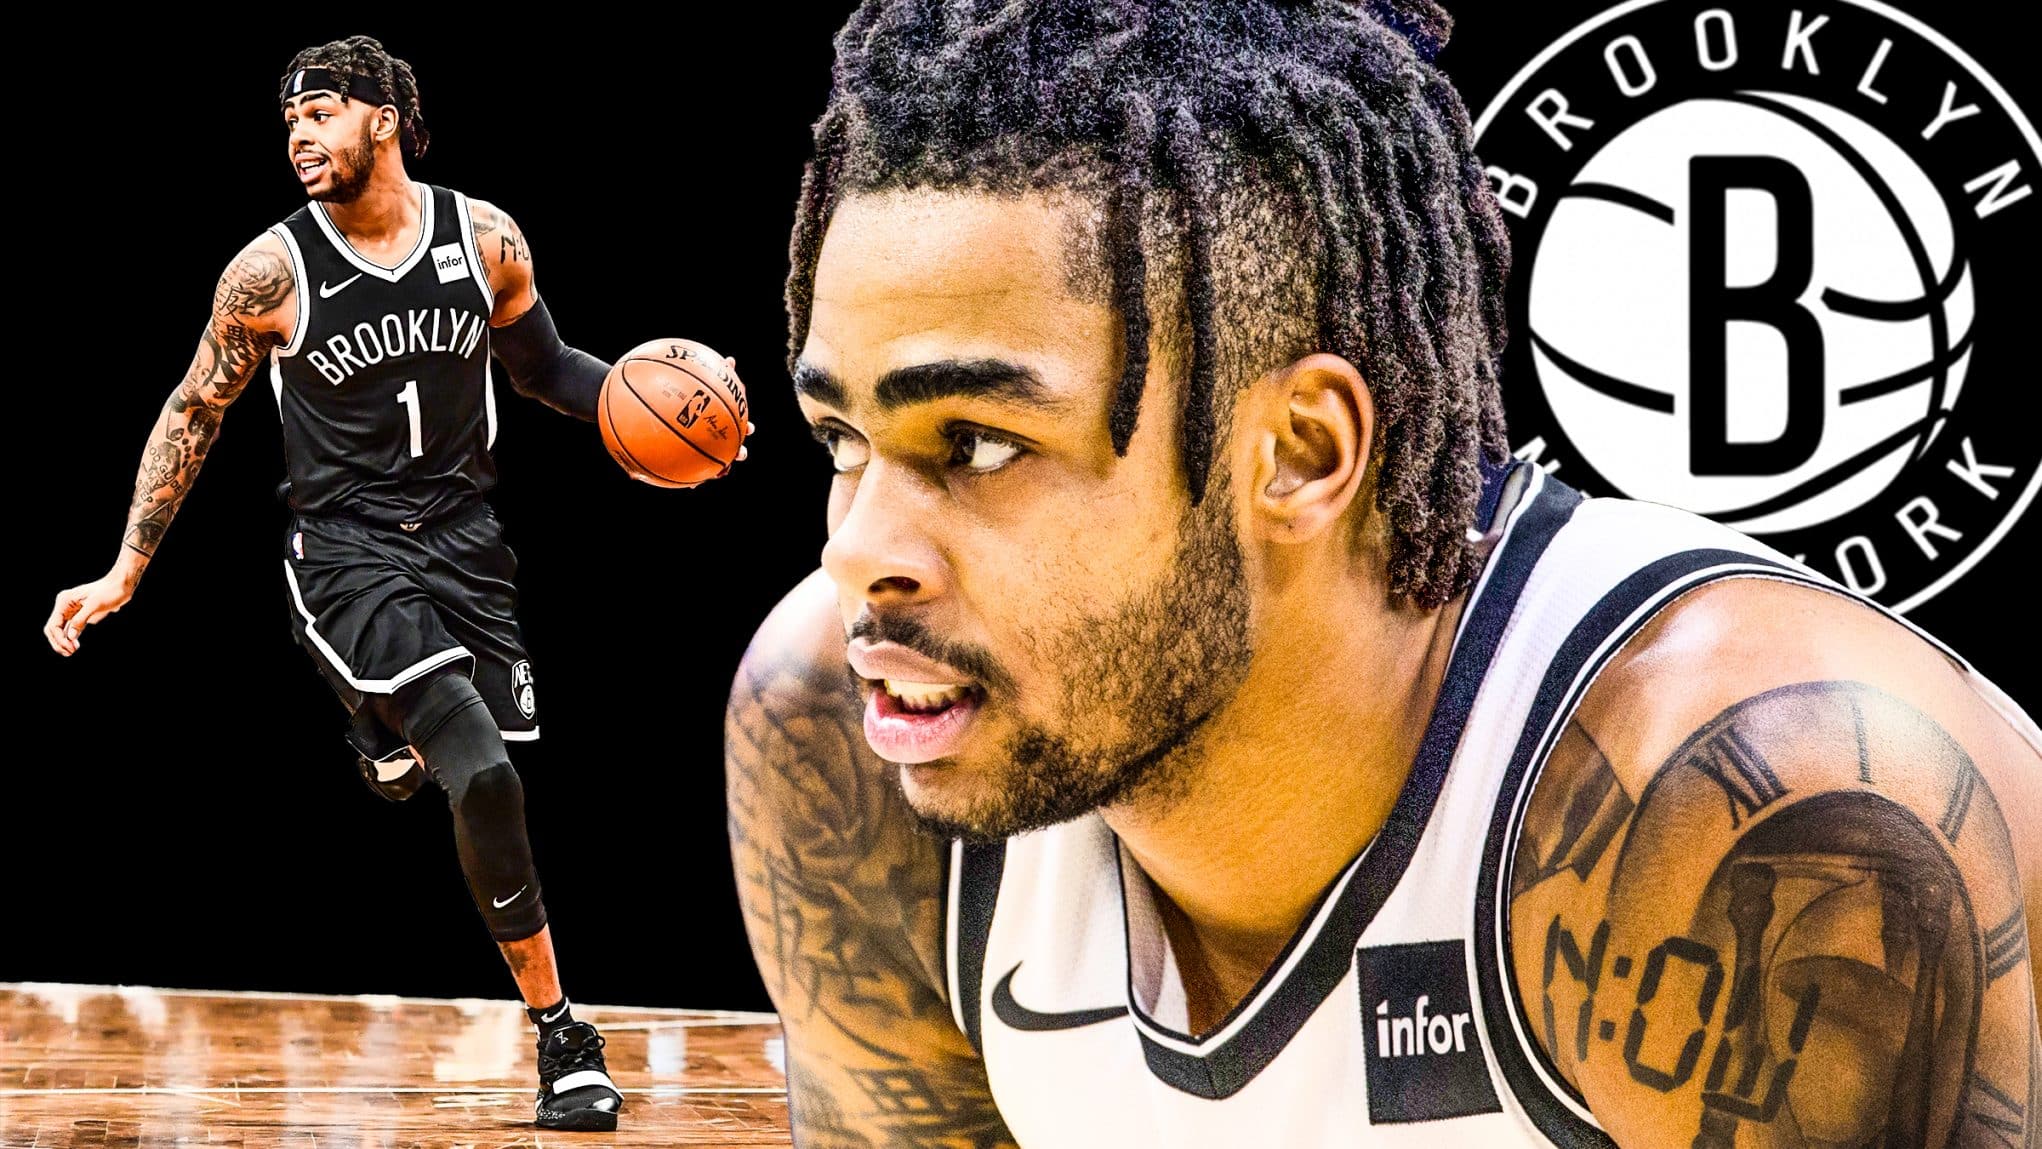 Bleacher Report - D'Angelo Russell took the leap at 22. 